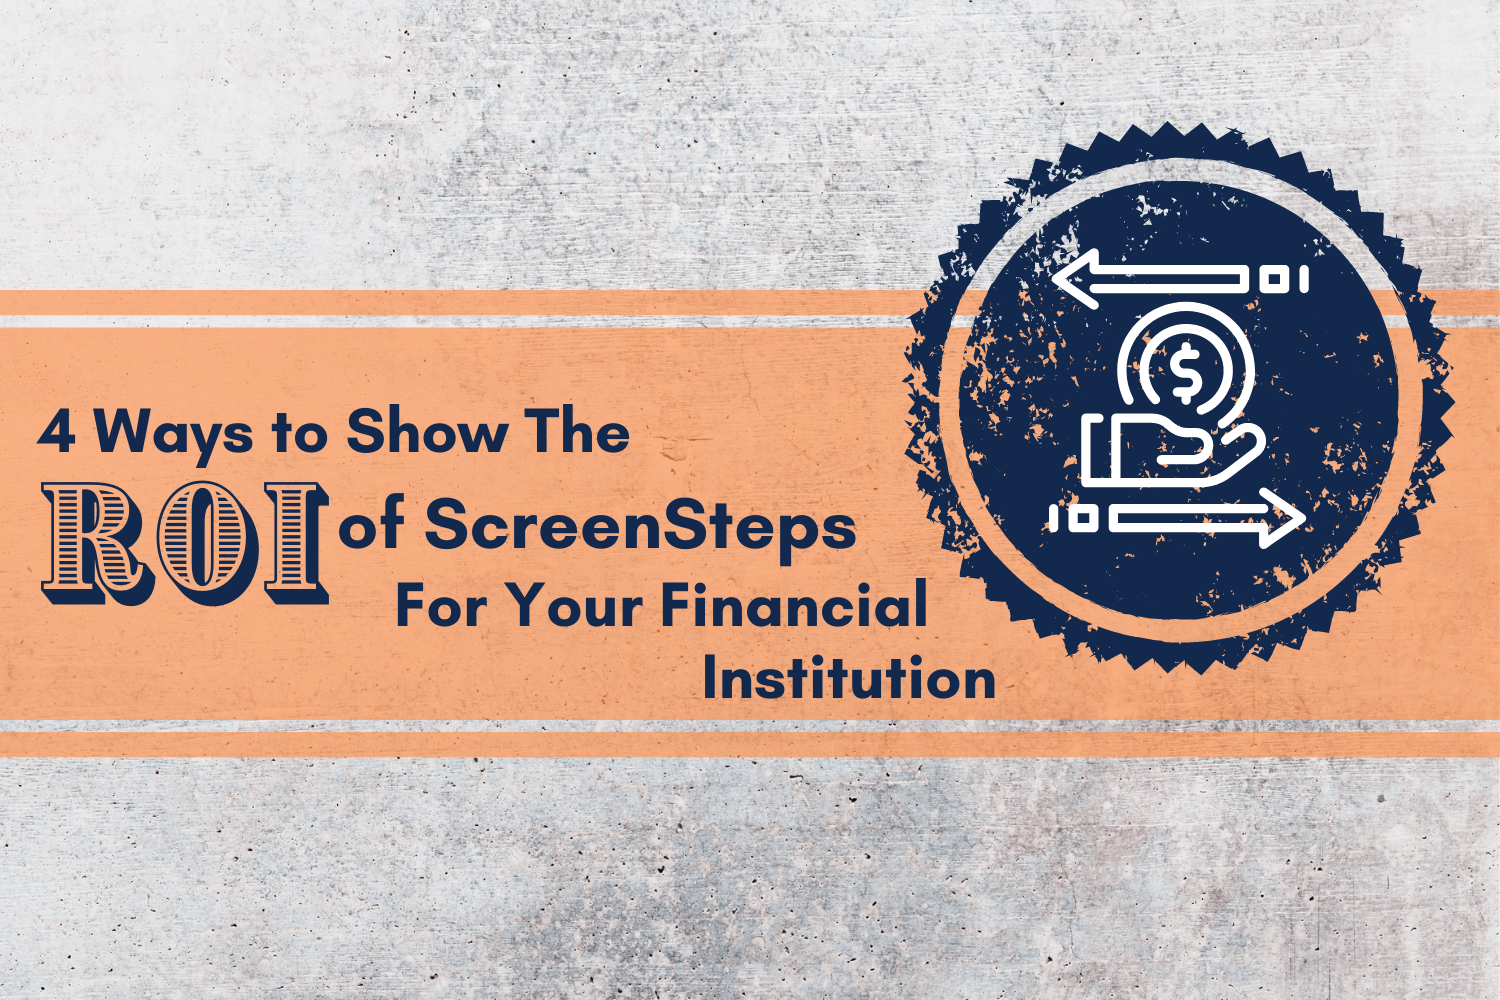 4 Ways to Show The ROI of ScreenSteps For Your Financial Institution